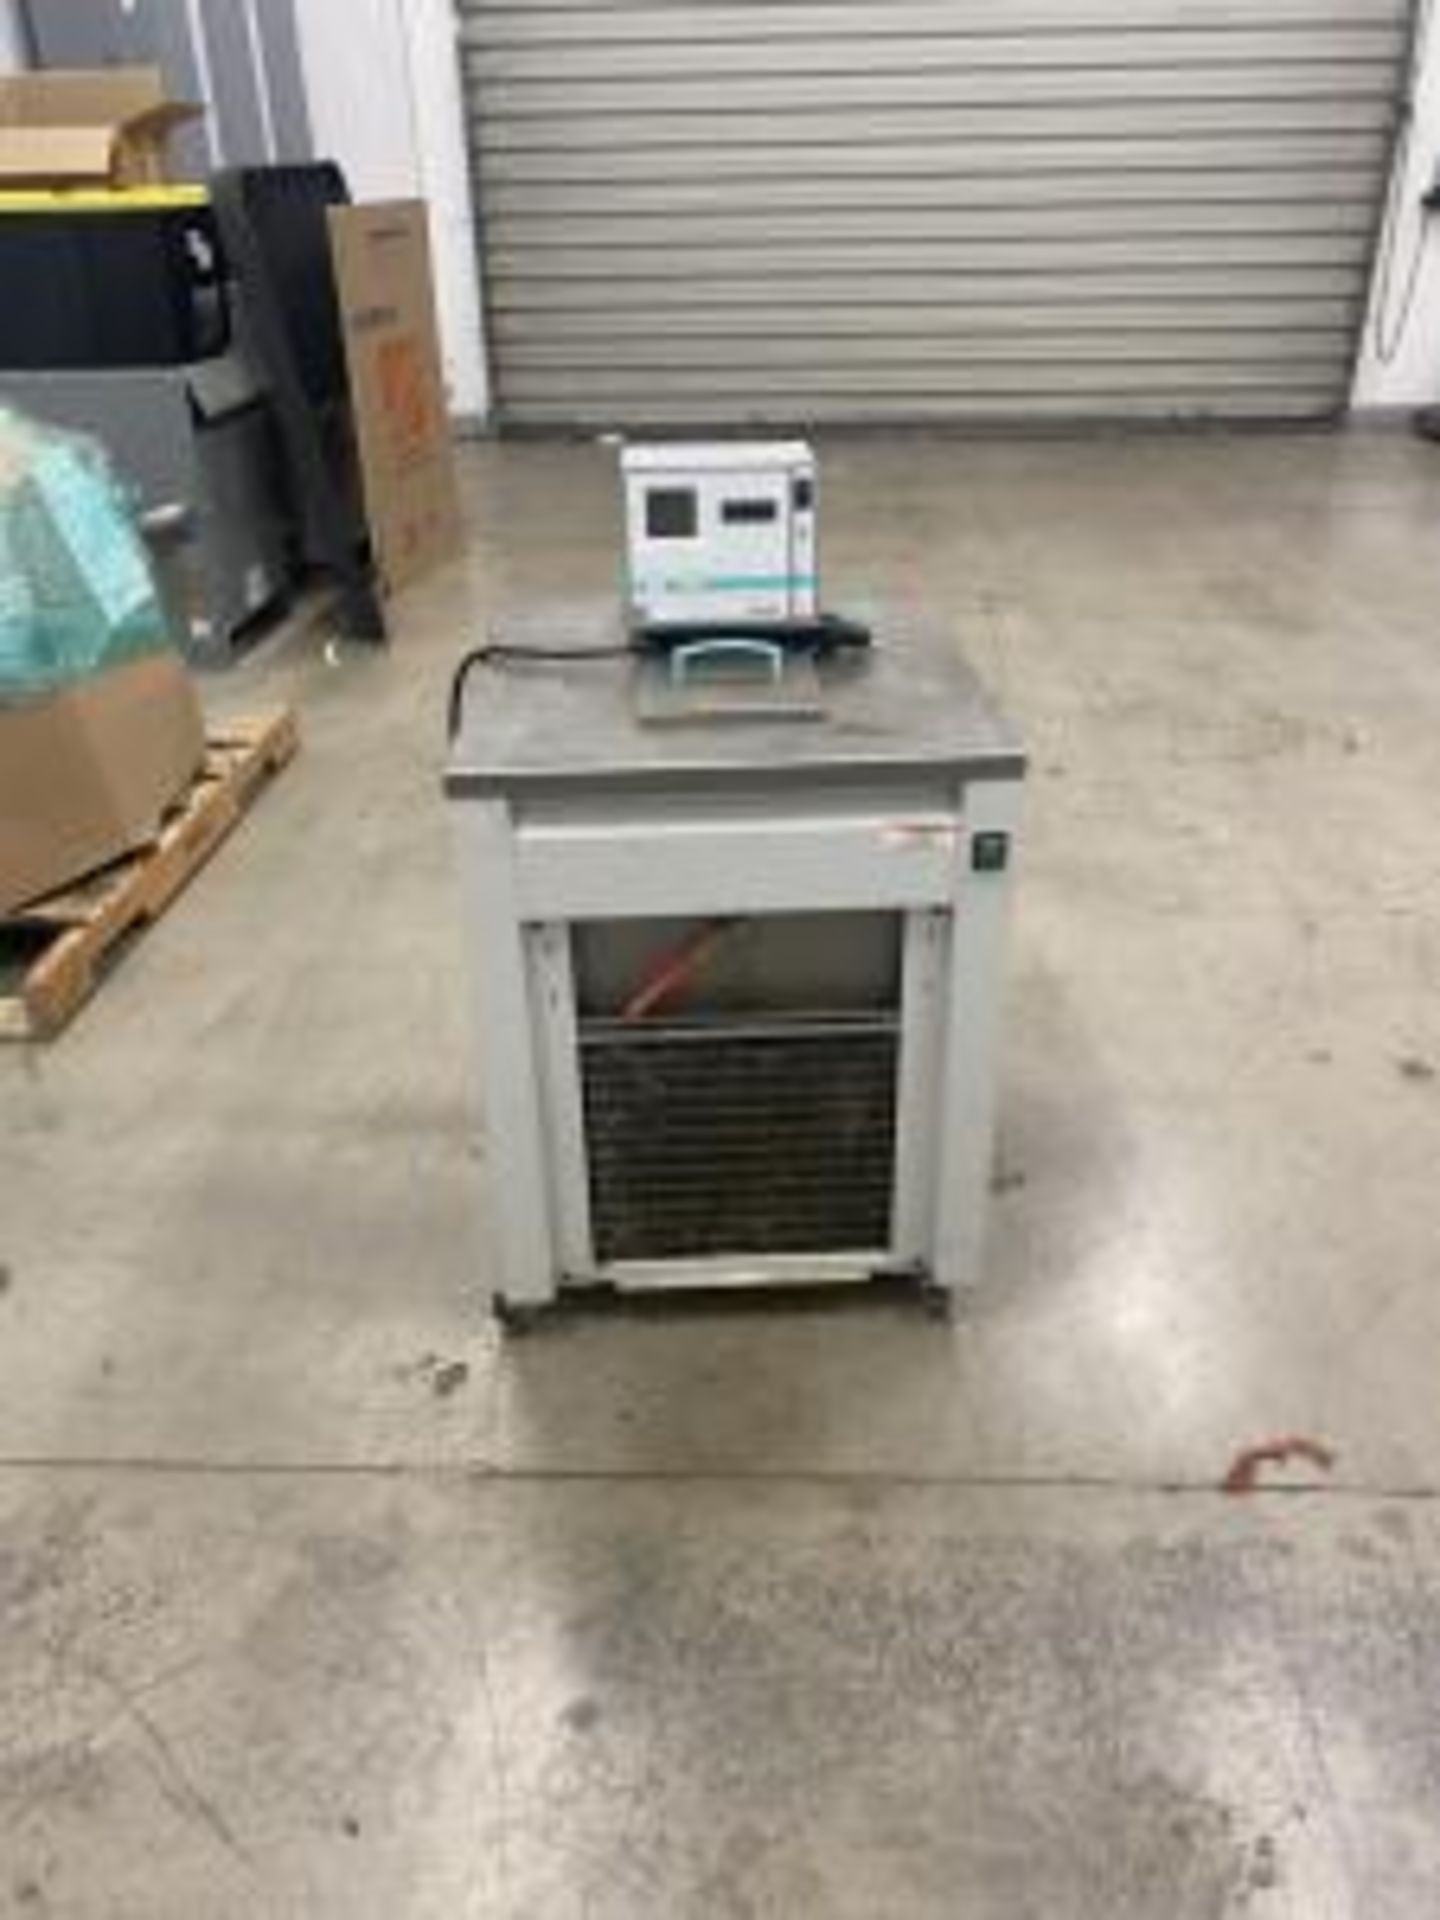 Used Julabo -90C To +100C Refrigerated-Heated Circulator. Model FP89